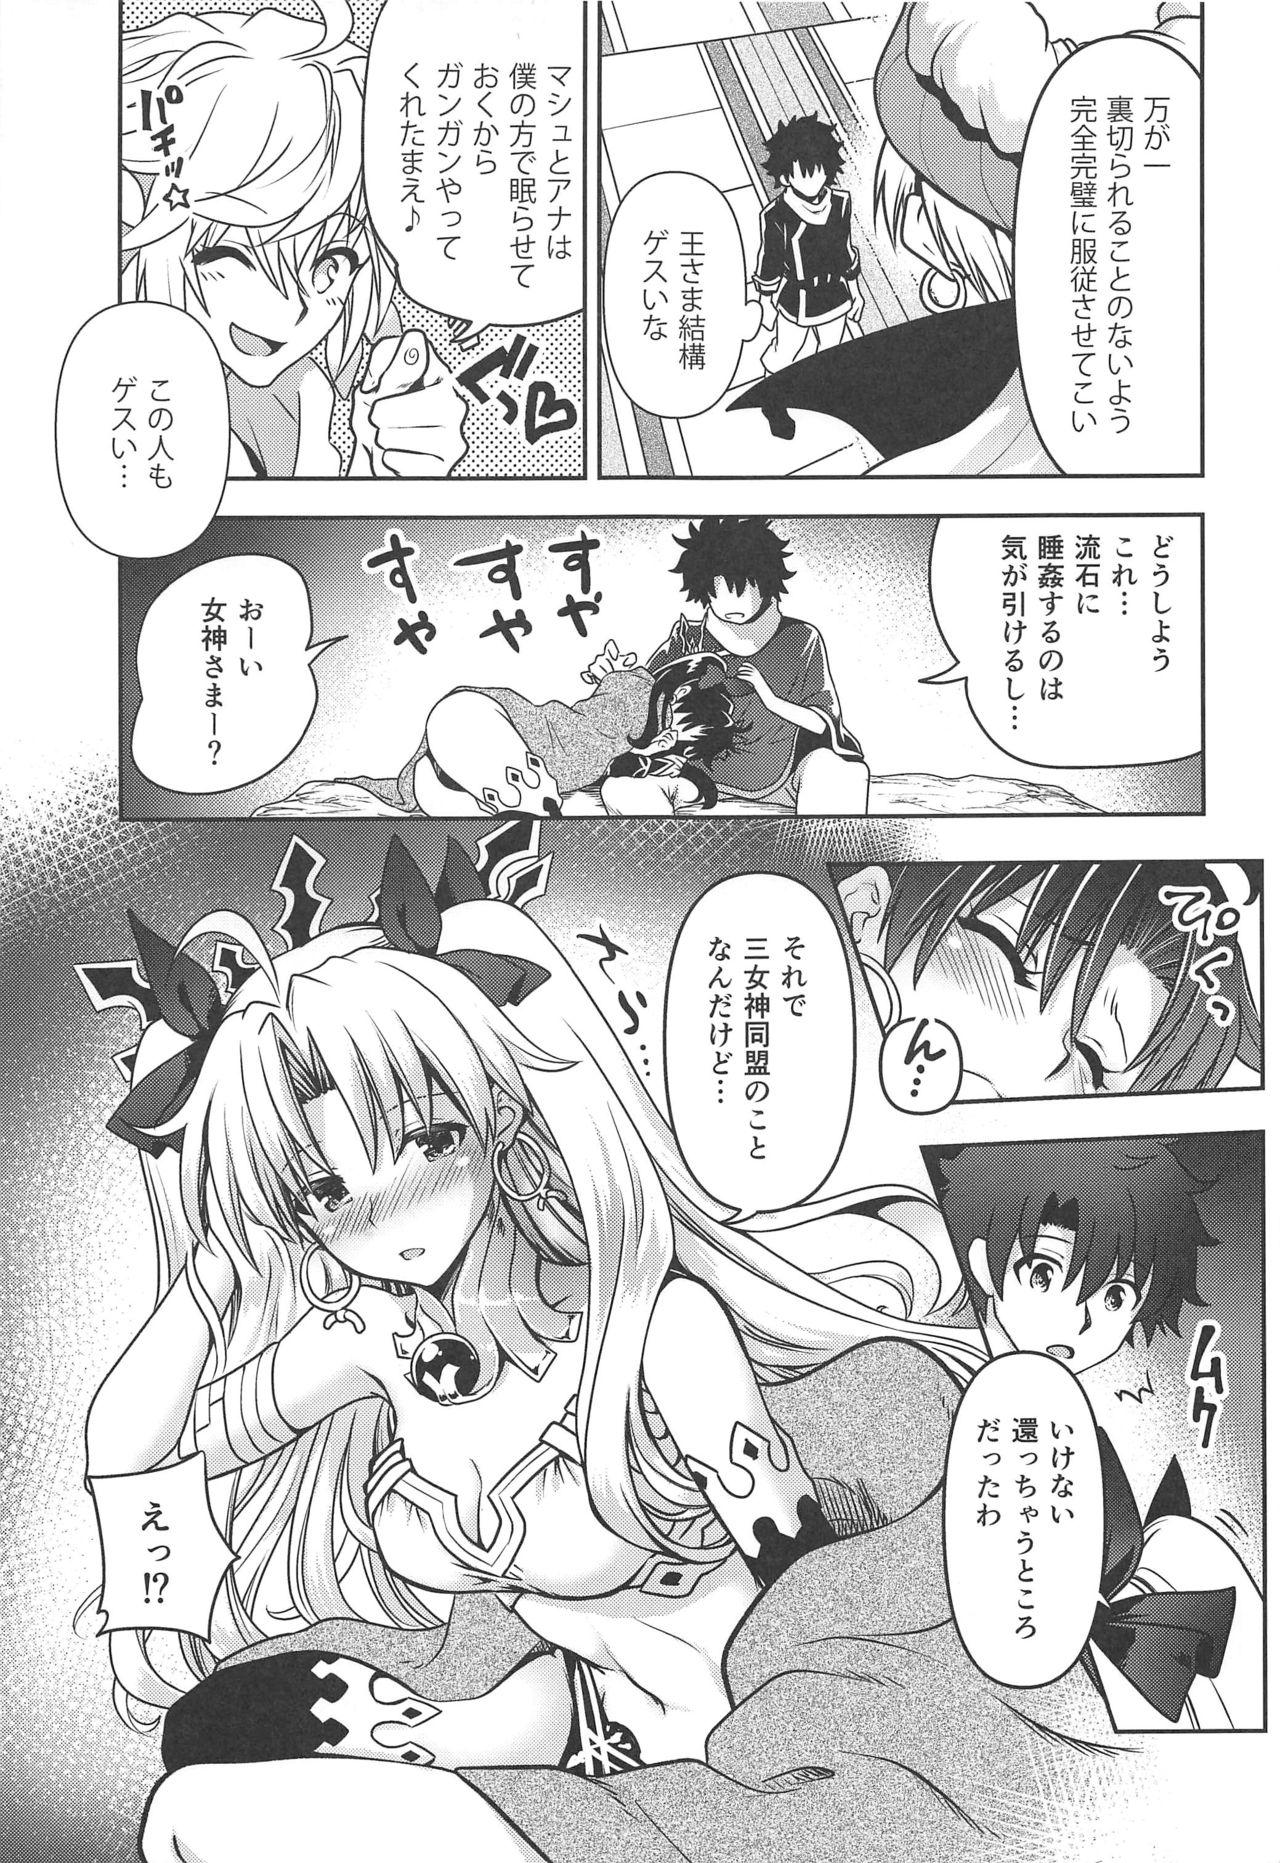 Spy Camera All Night Romance - Fate grand order Gay Dudes - Page 4